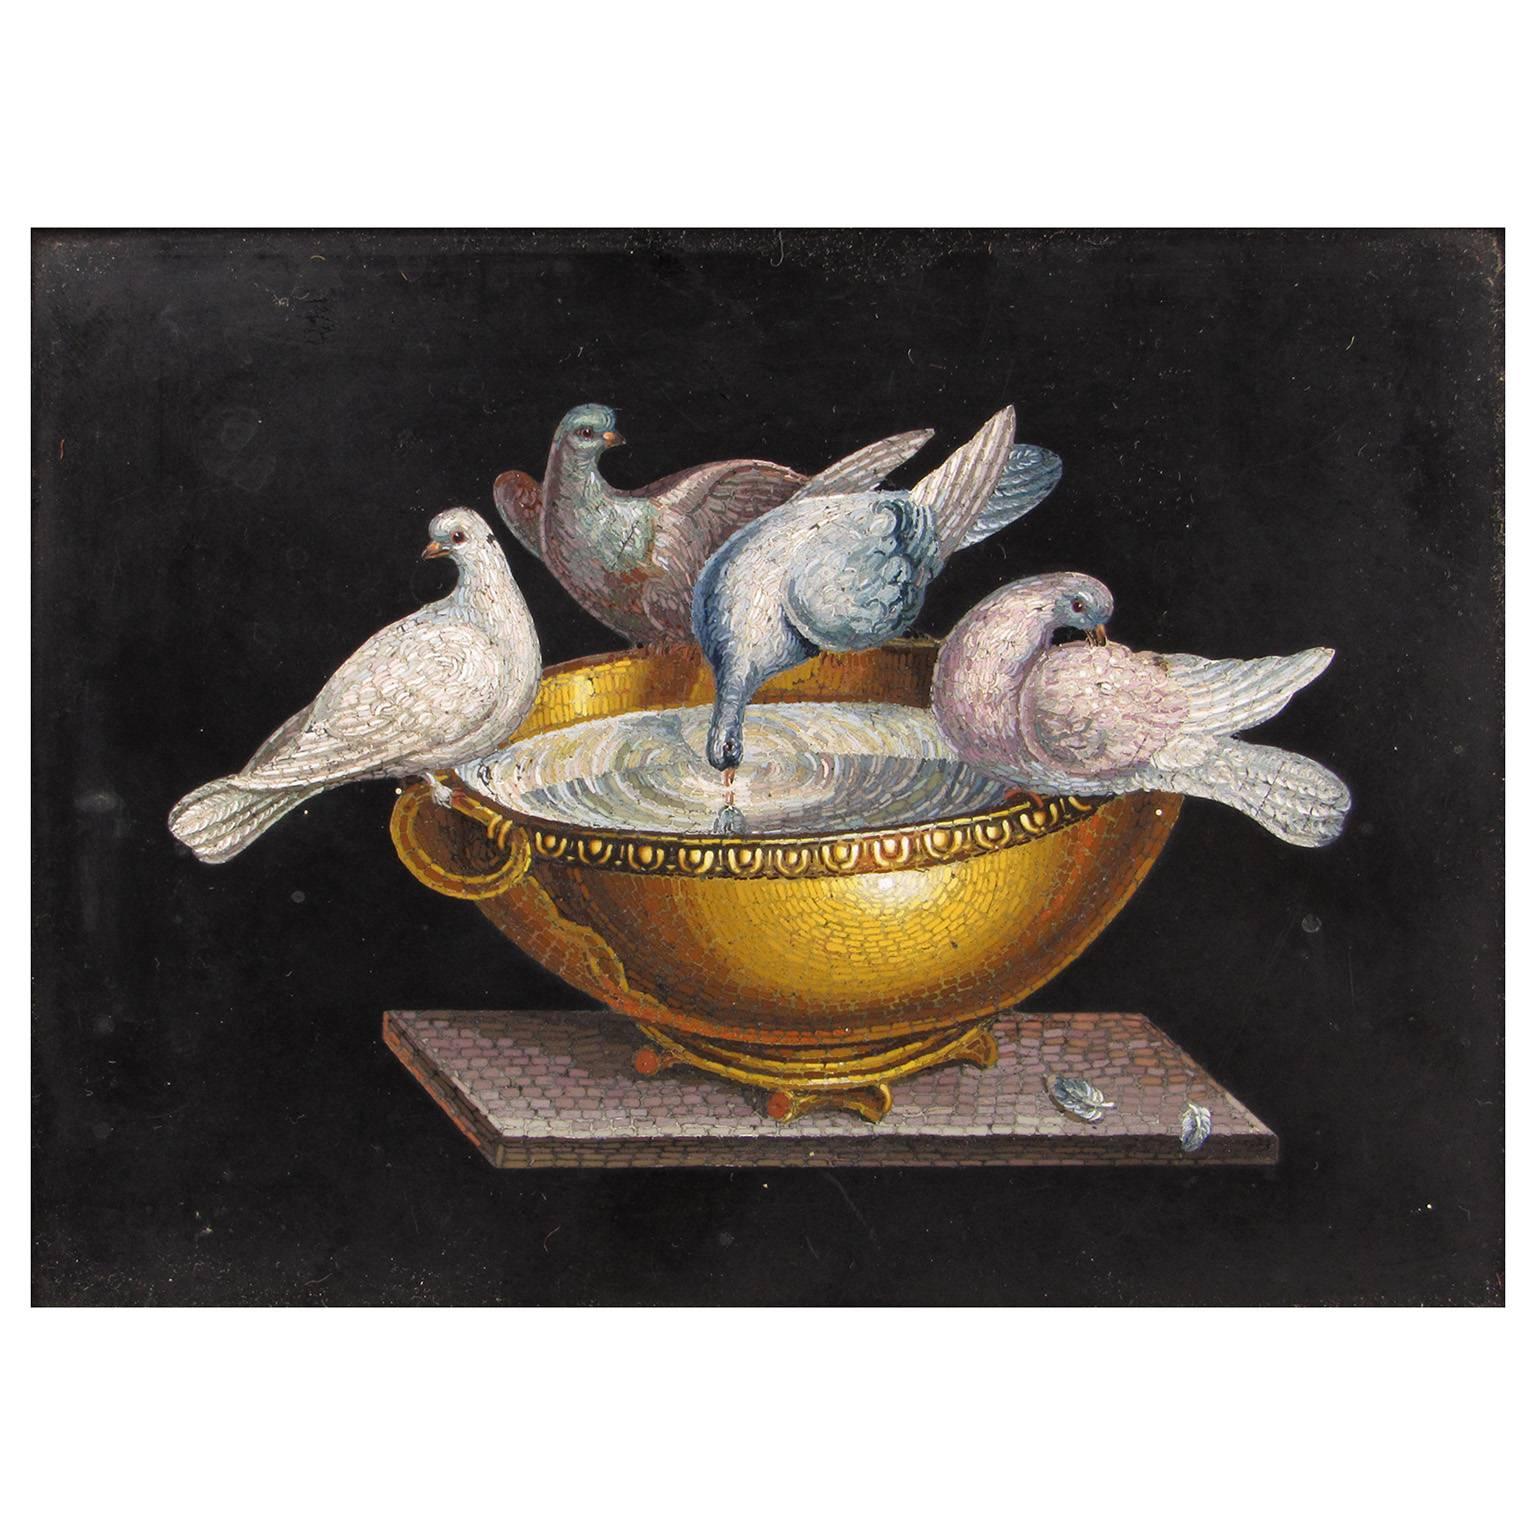 19th century Italian micromosaic panel depicting the Doves of Pliny, also known as the Capitoline Doves. Housed in it's original carved, ebonized and giltwood frame. Excellent quality.
Mosaic: 4 x 5 1/4 inches; framed: 6 78 x 8 1/4 inches.
Note: